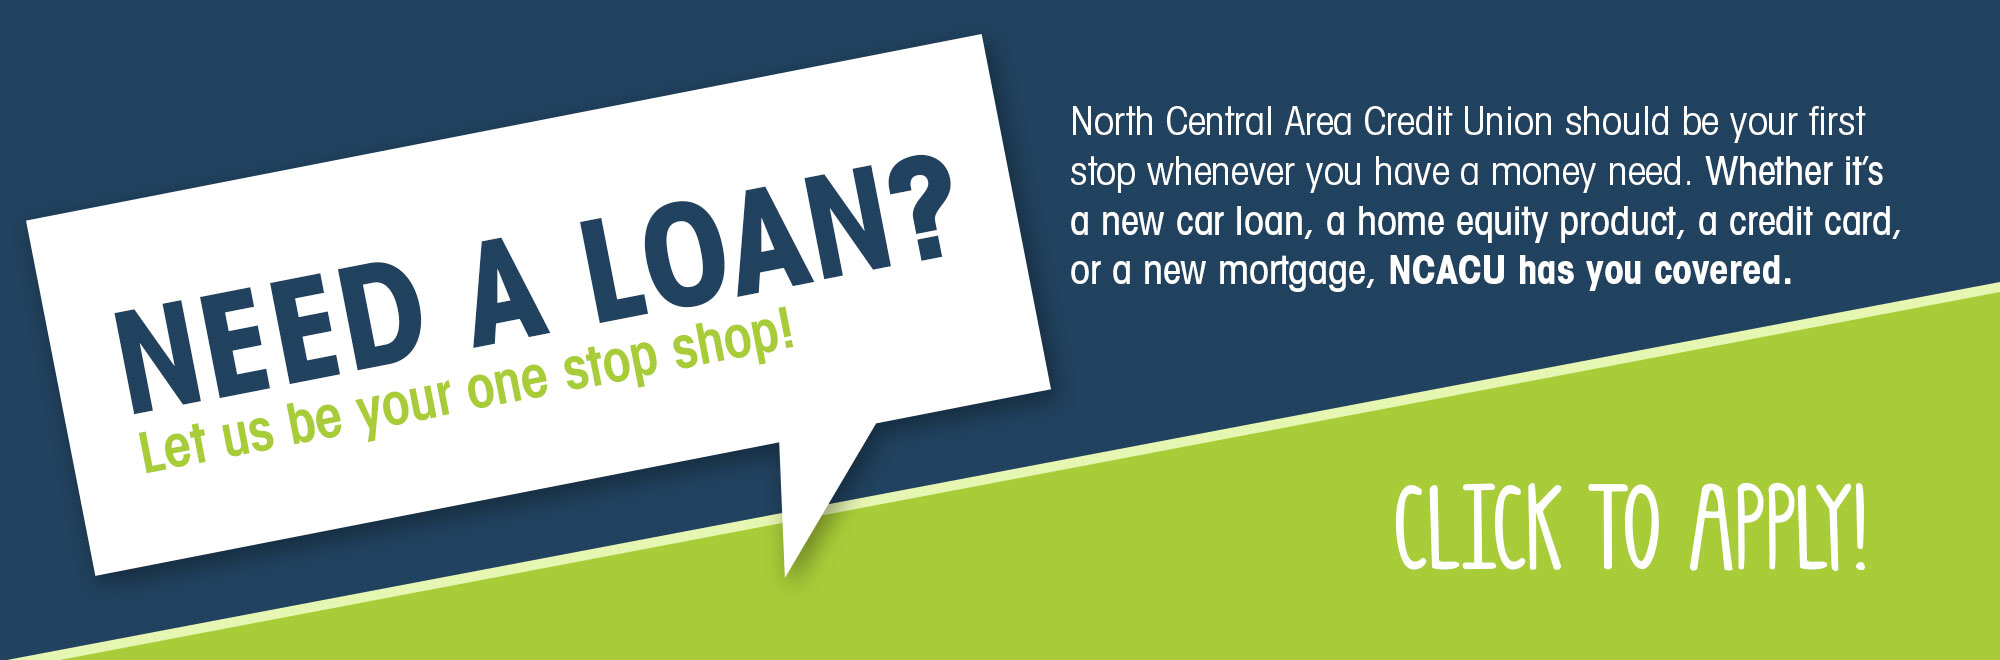 North Central Area Credit Union - Trusted relationships